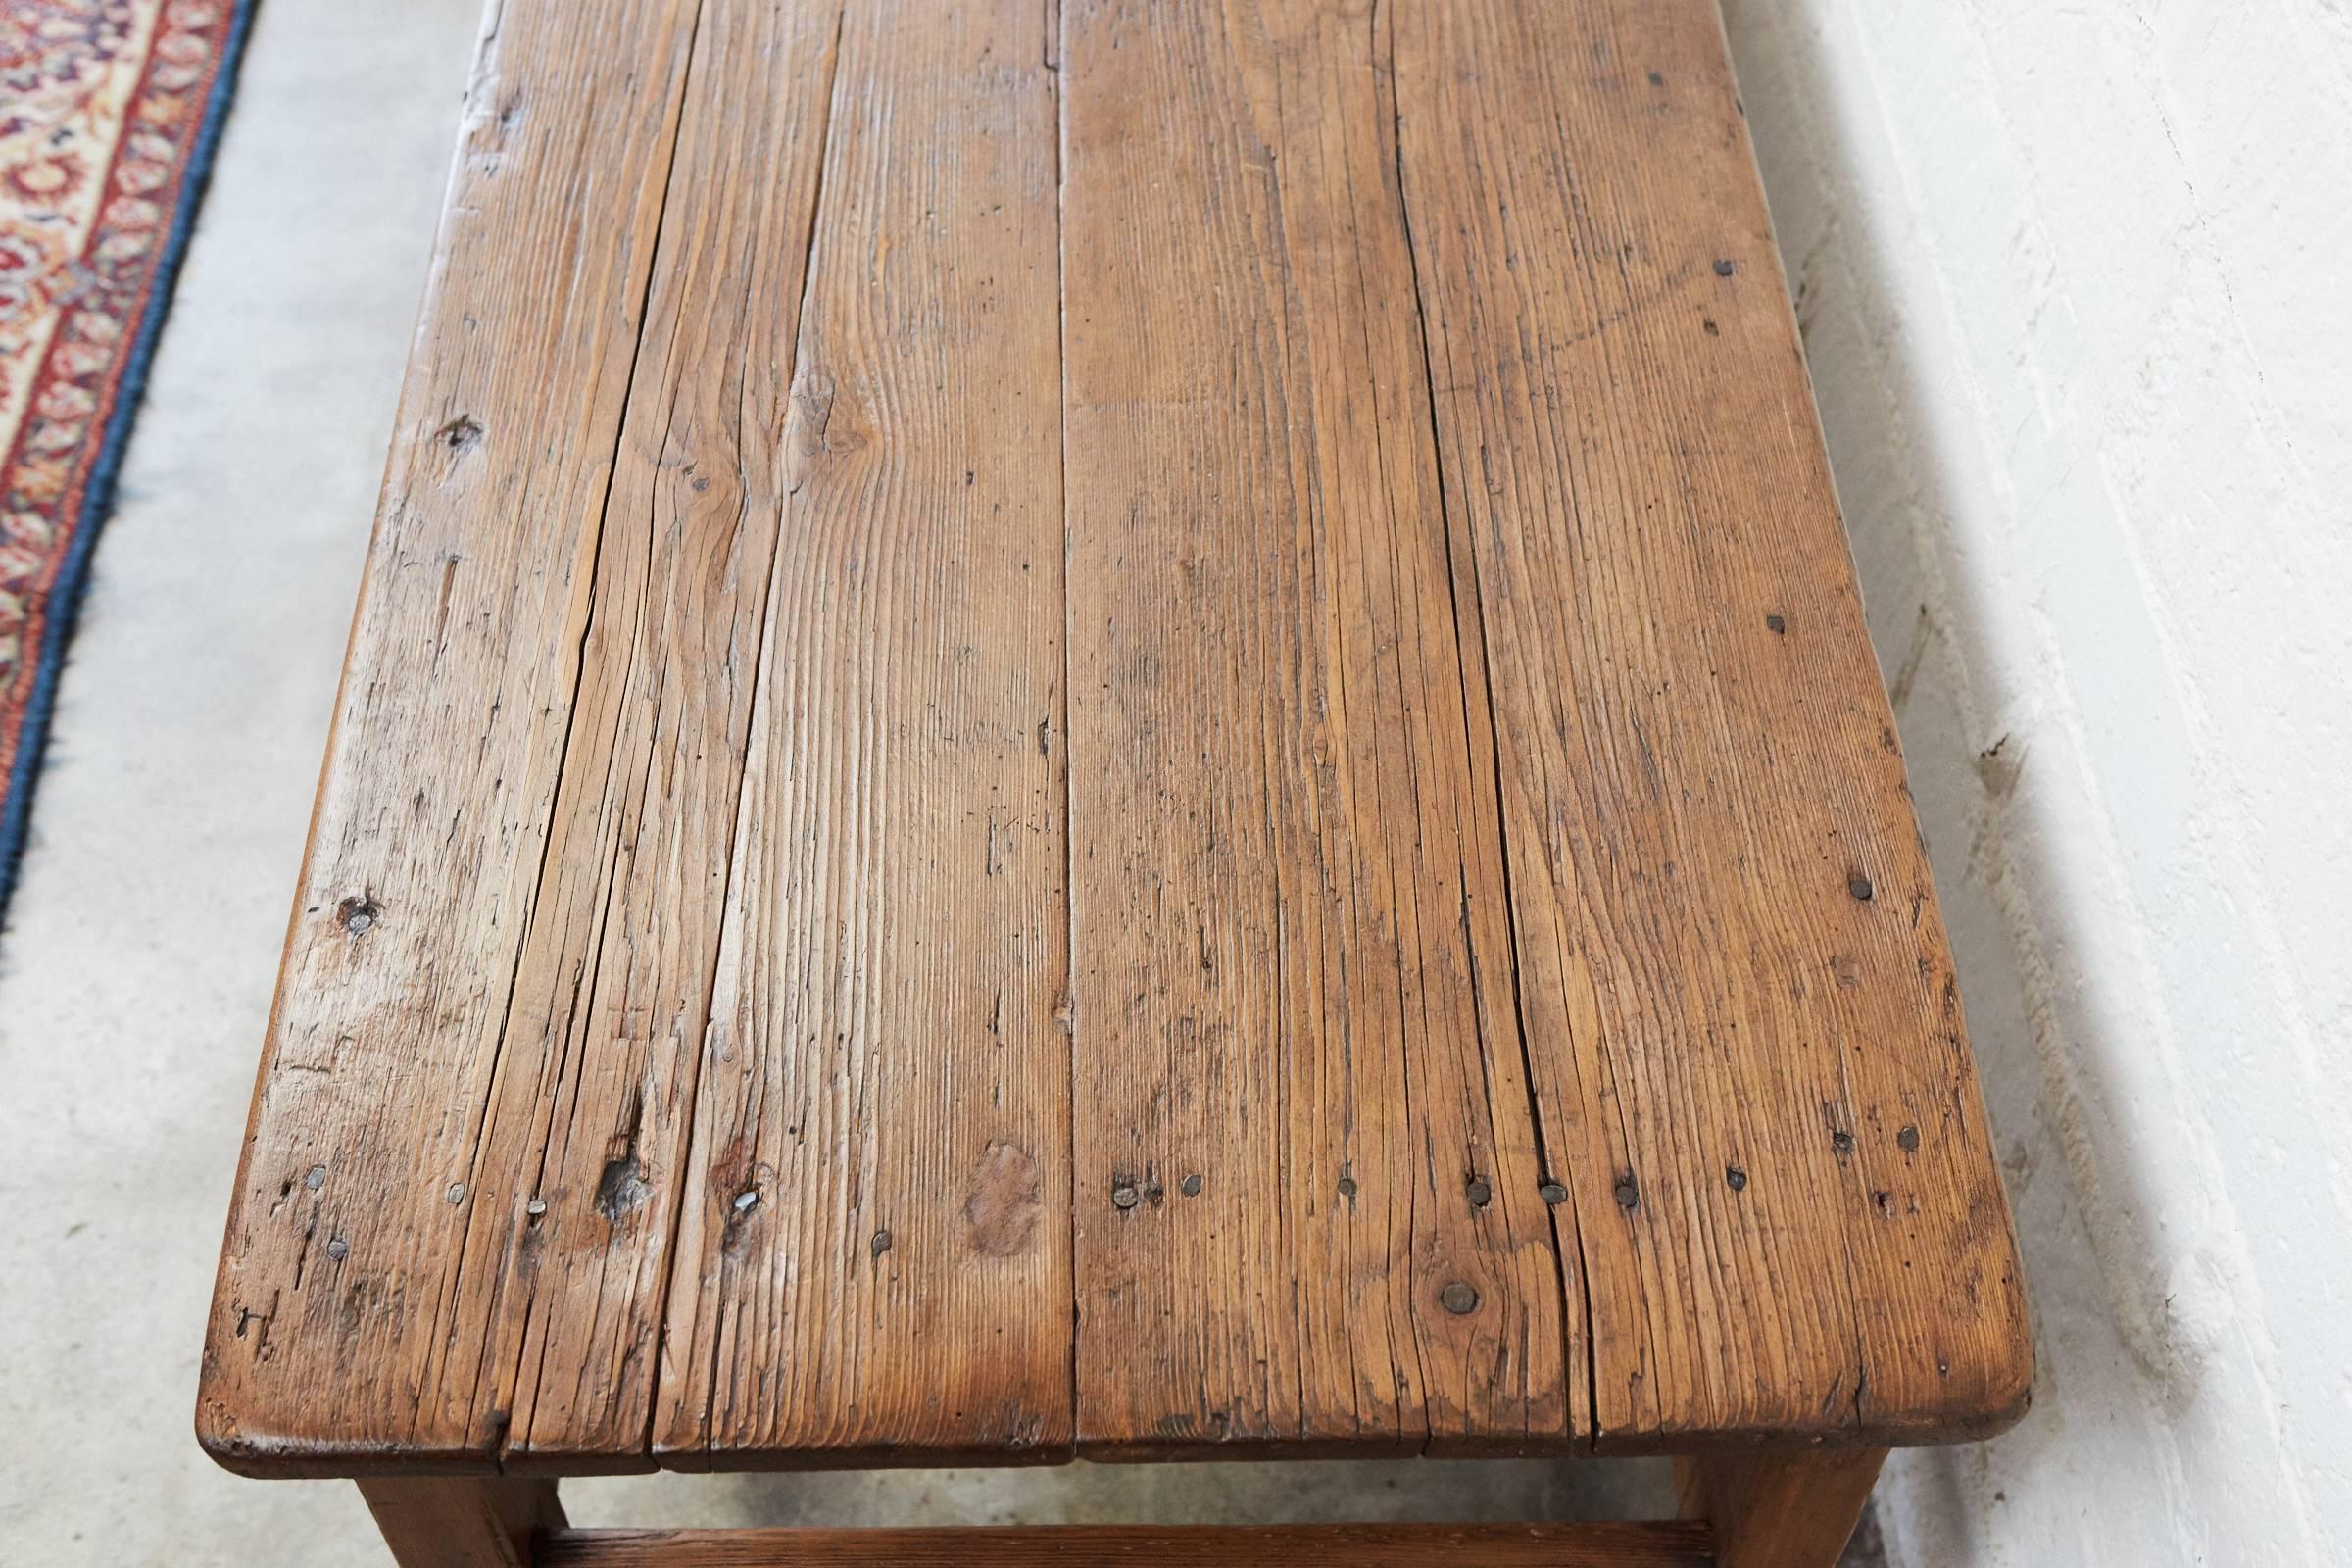 This long, narrow country table is of a good size having been a farm table converted later into a coffee table. The wood has signs of age and use consistent with a late 19th century piece. The legs are slightly tapered with nicely shaped